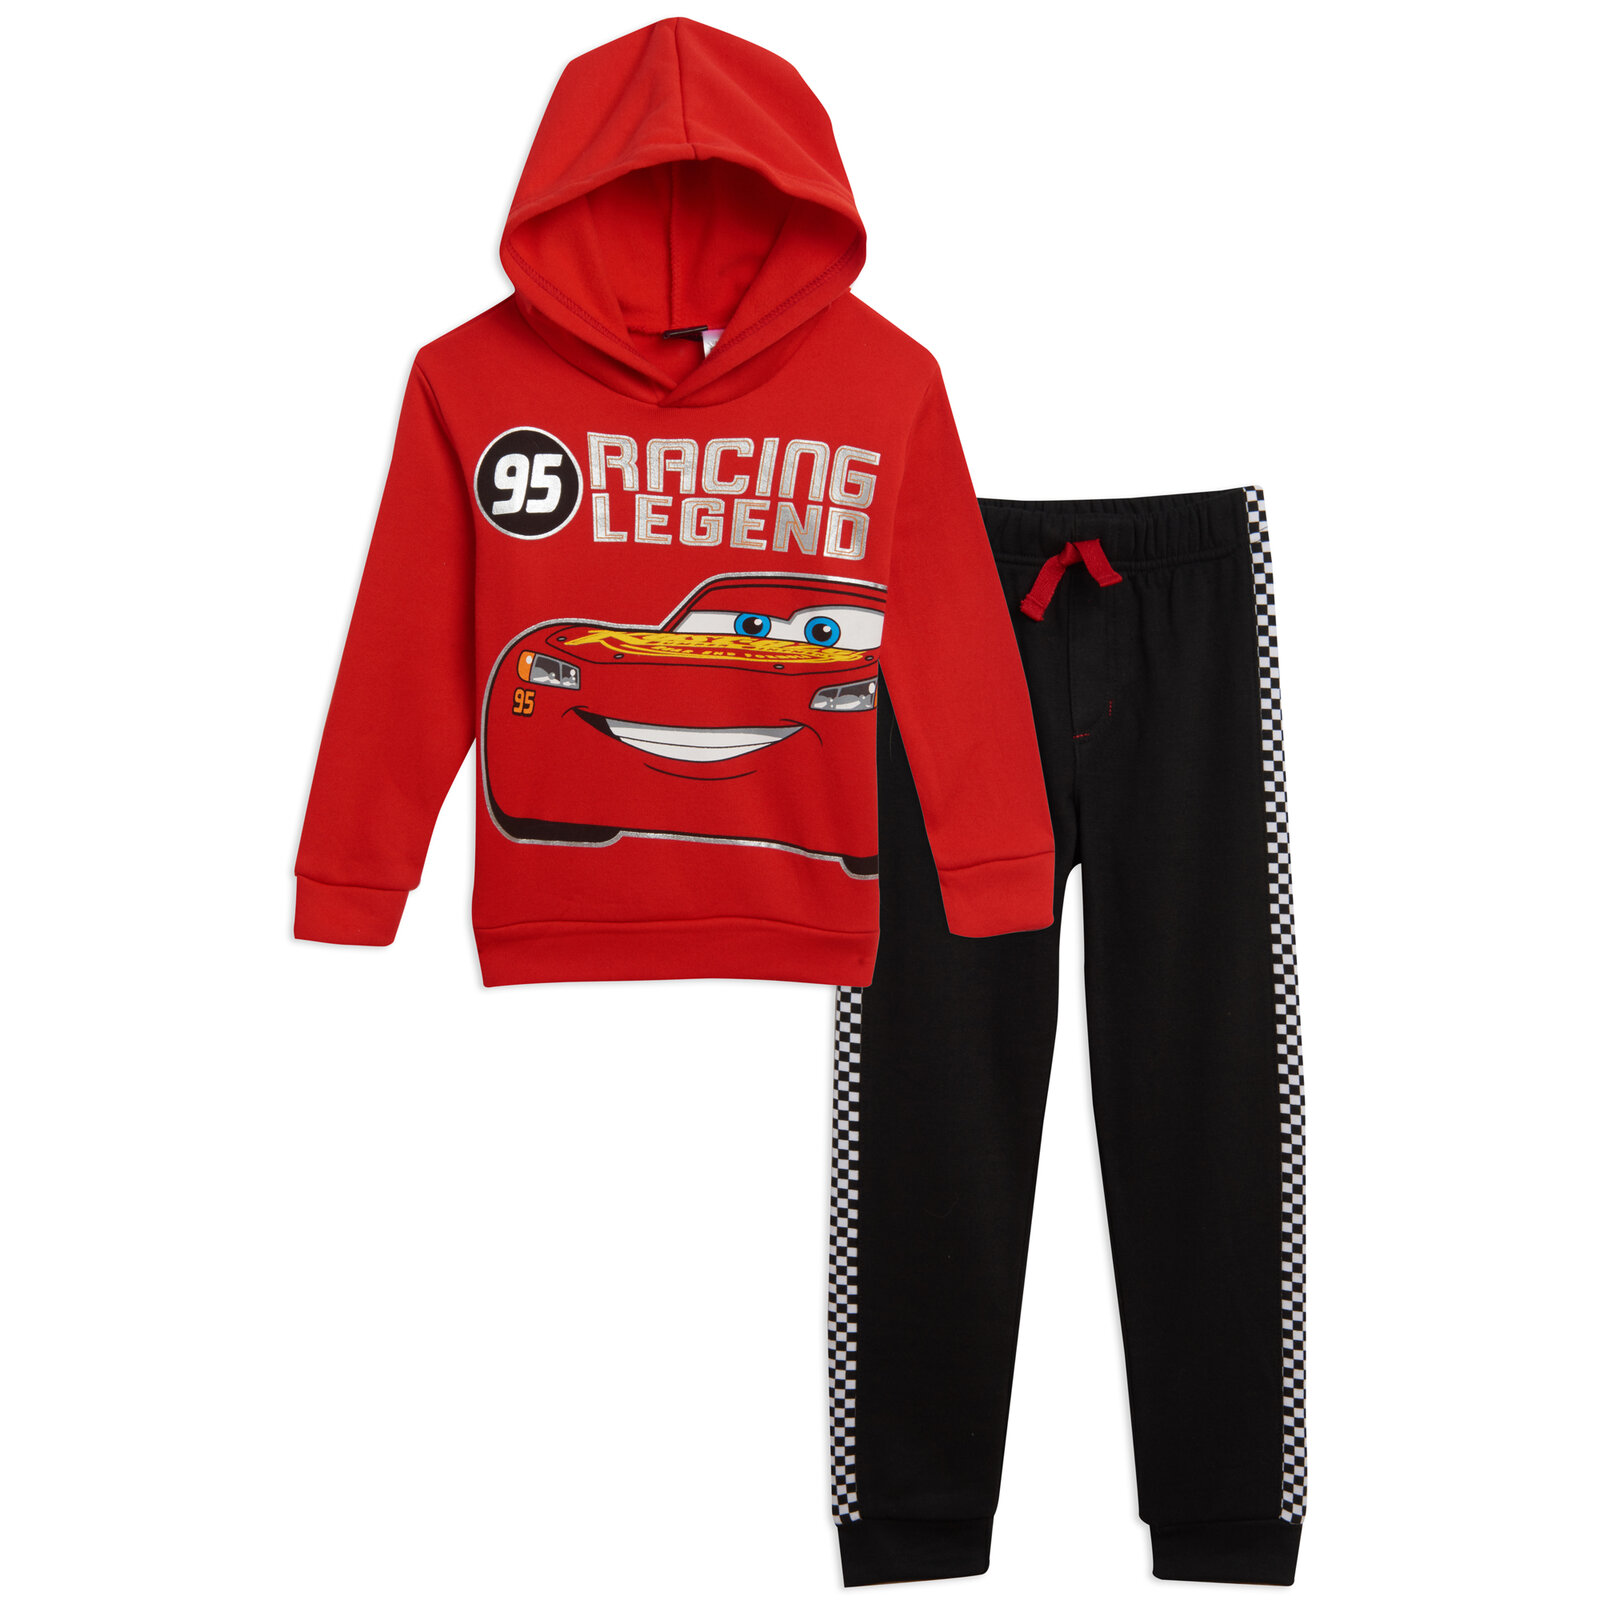 Disney Pixar Cars Lightning McQueen Toddler Boys Hoodie and Pants Outfit Set Toddler to Big Kid - image 1 of 5